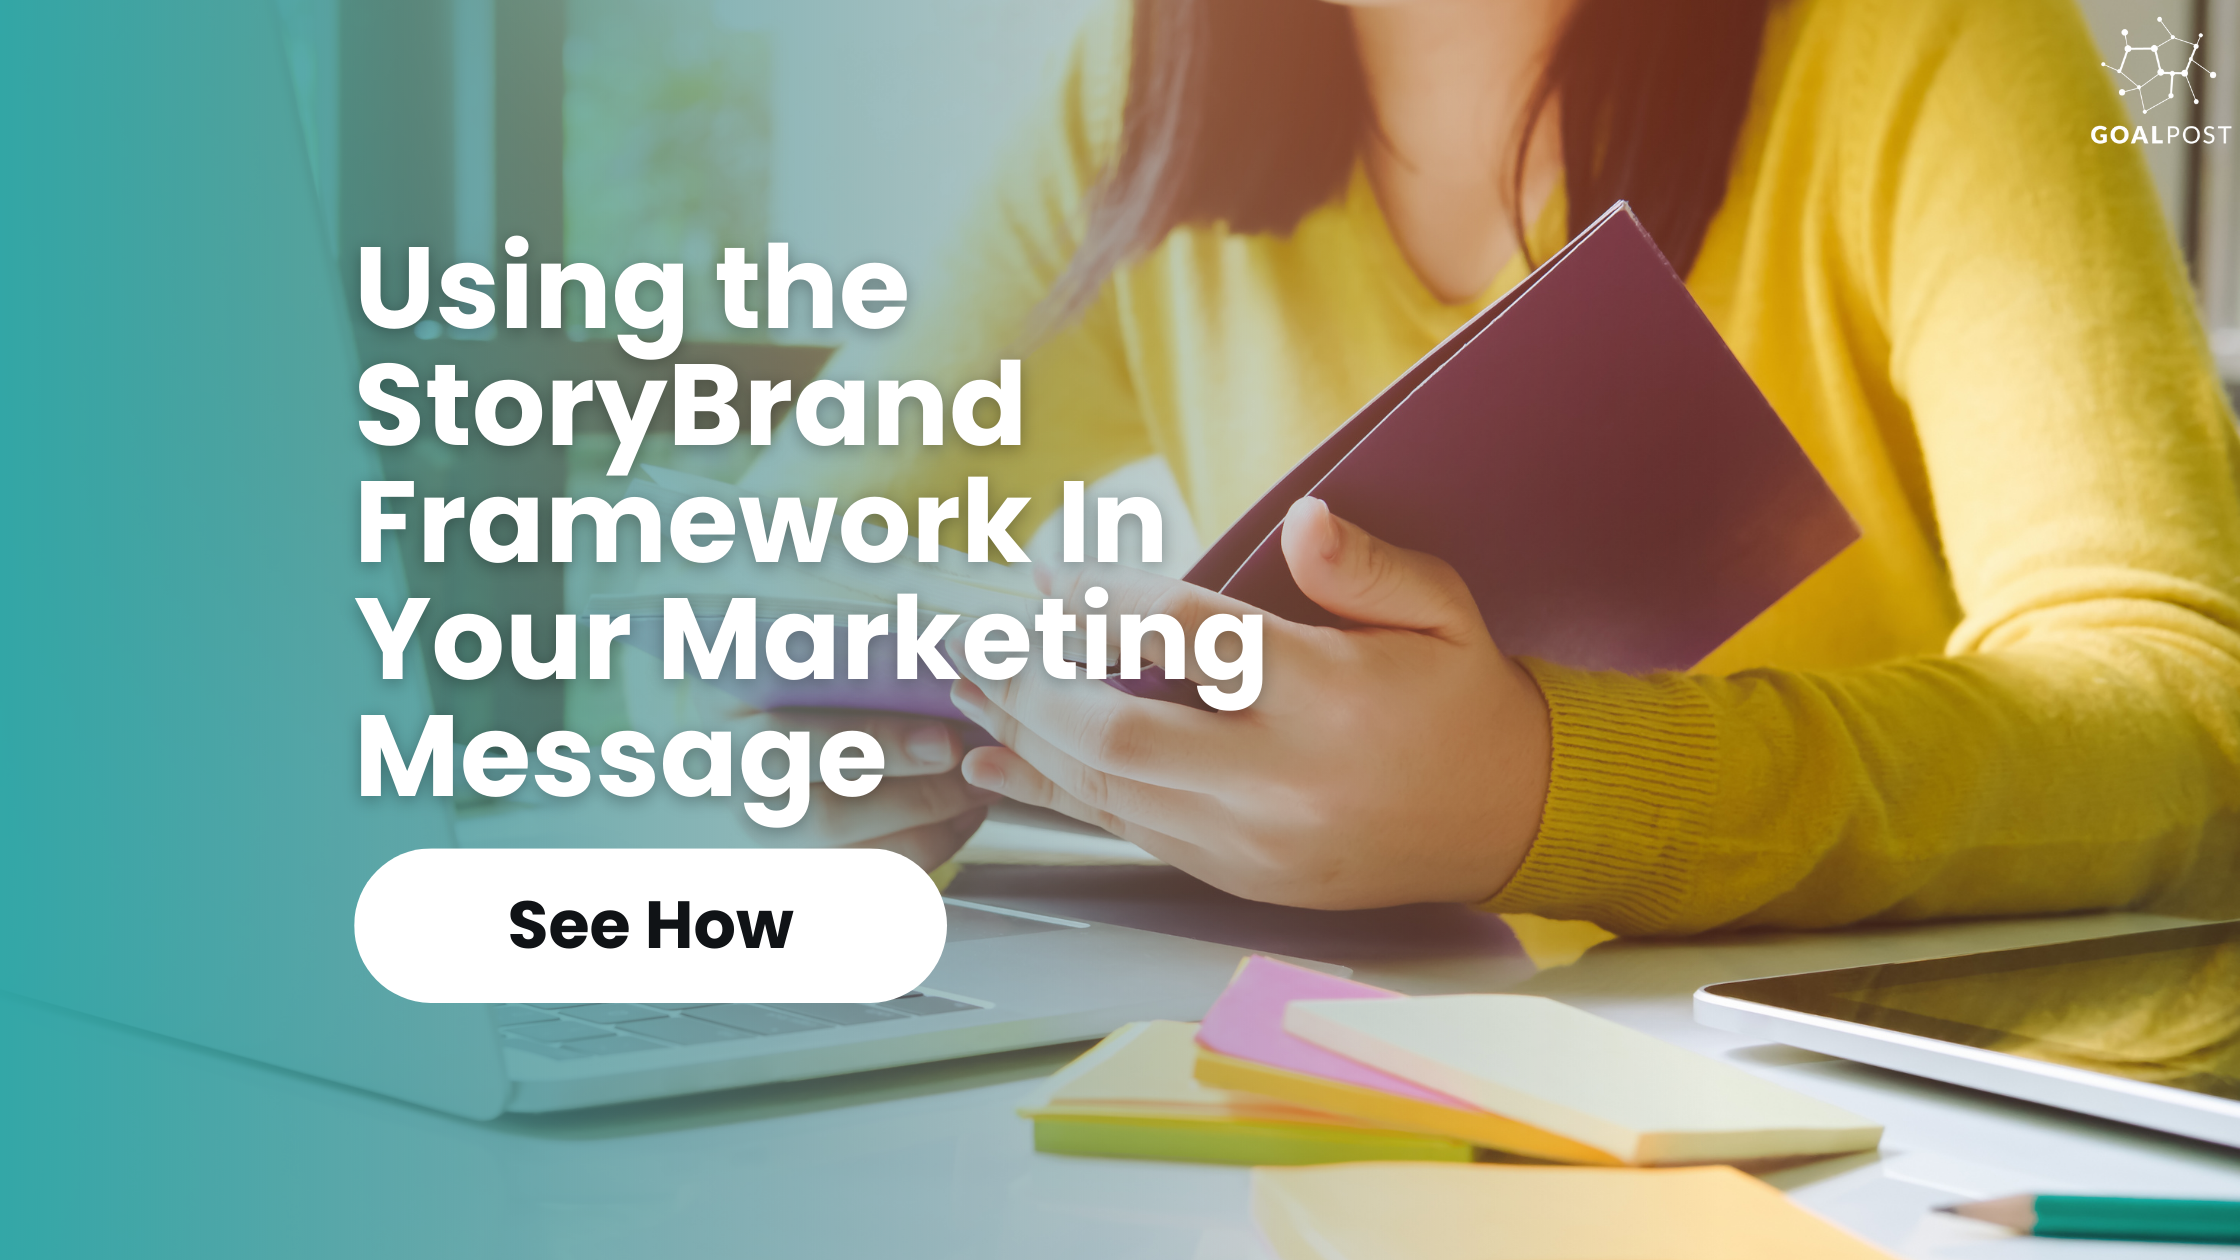 How to Use the StoryBrand Framework In Your Marketing Message